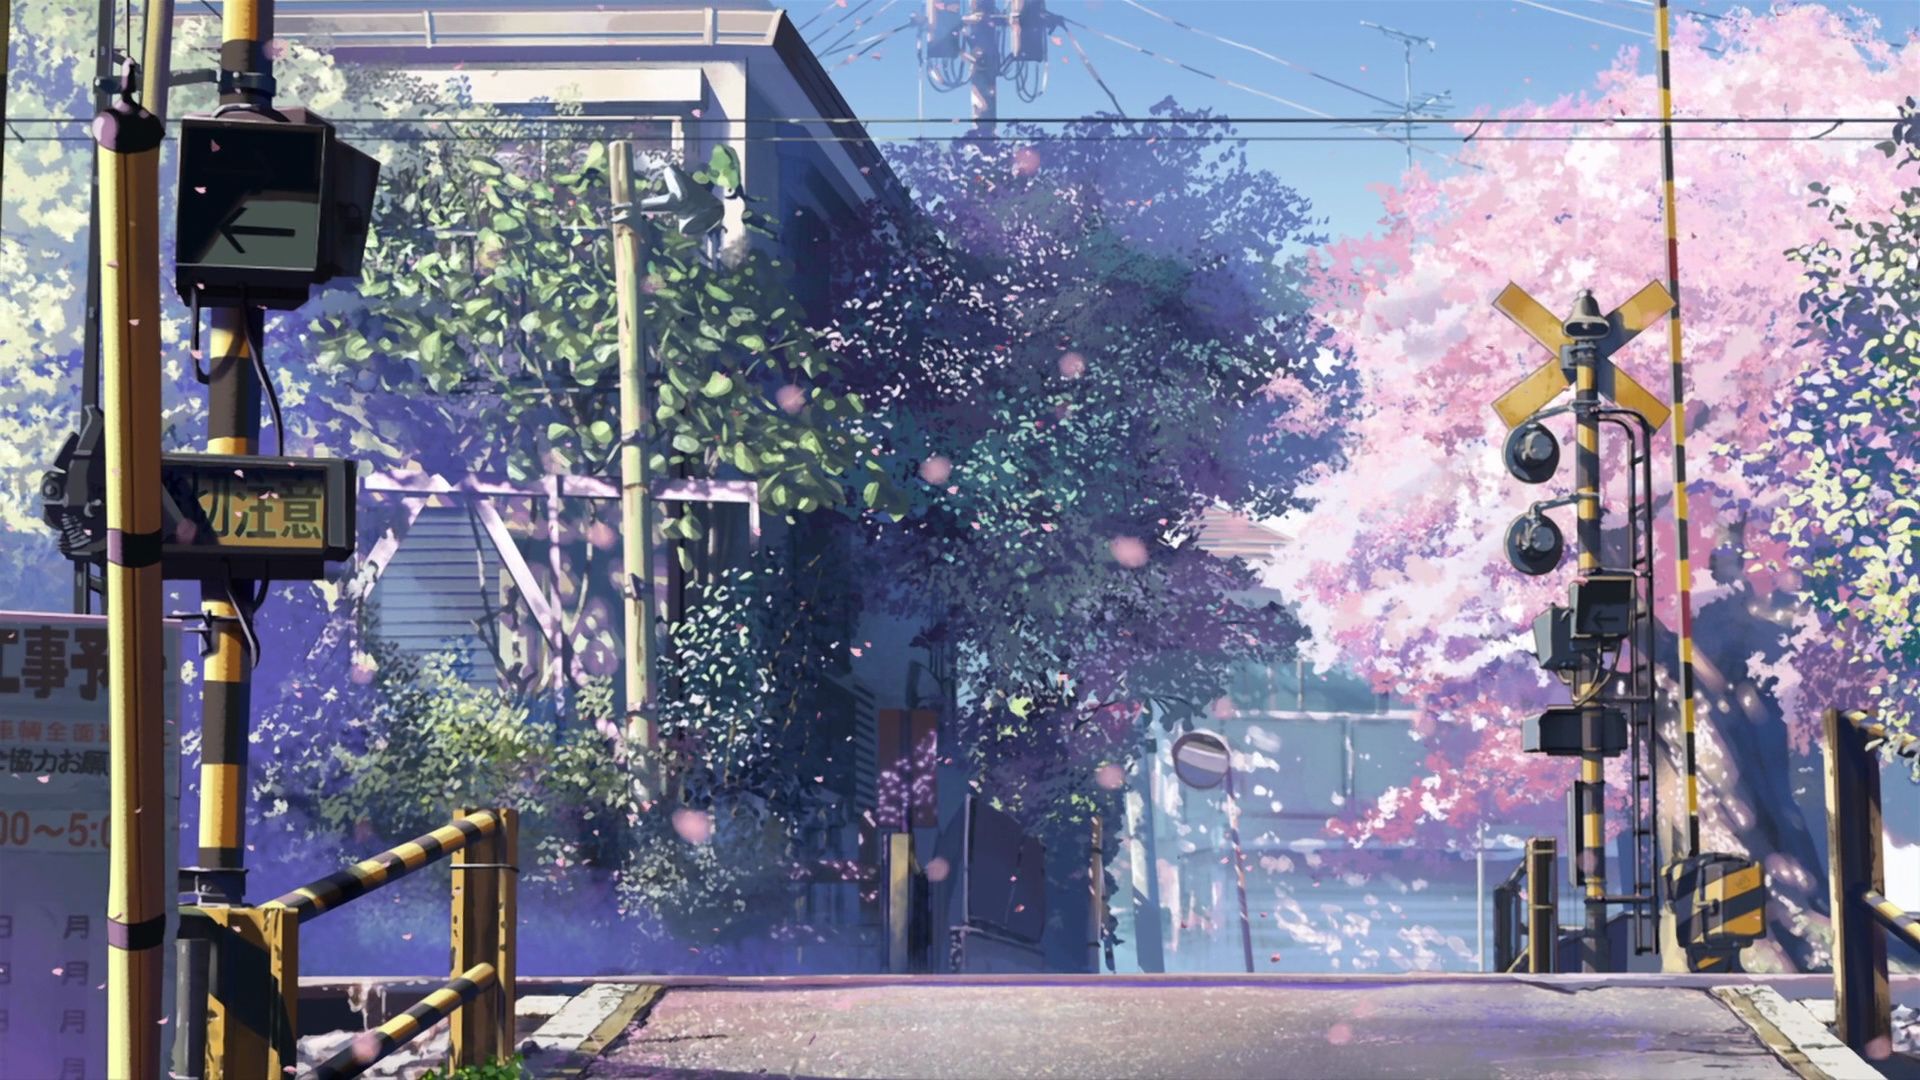 106 5 Centimeters Per Second HD Wallpapers Backgrounds